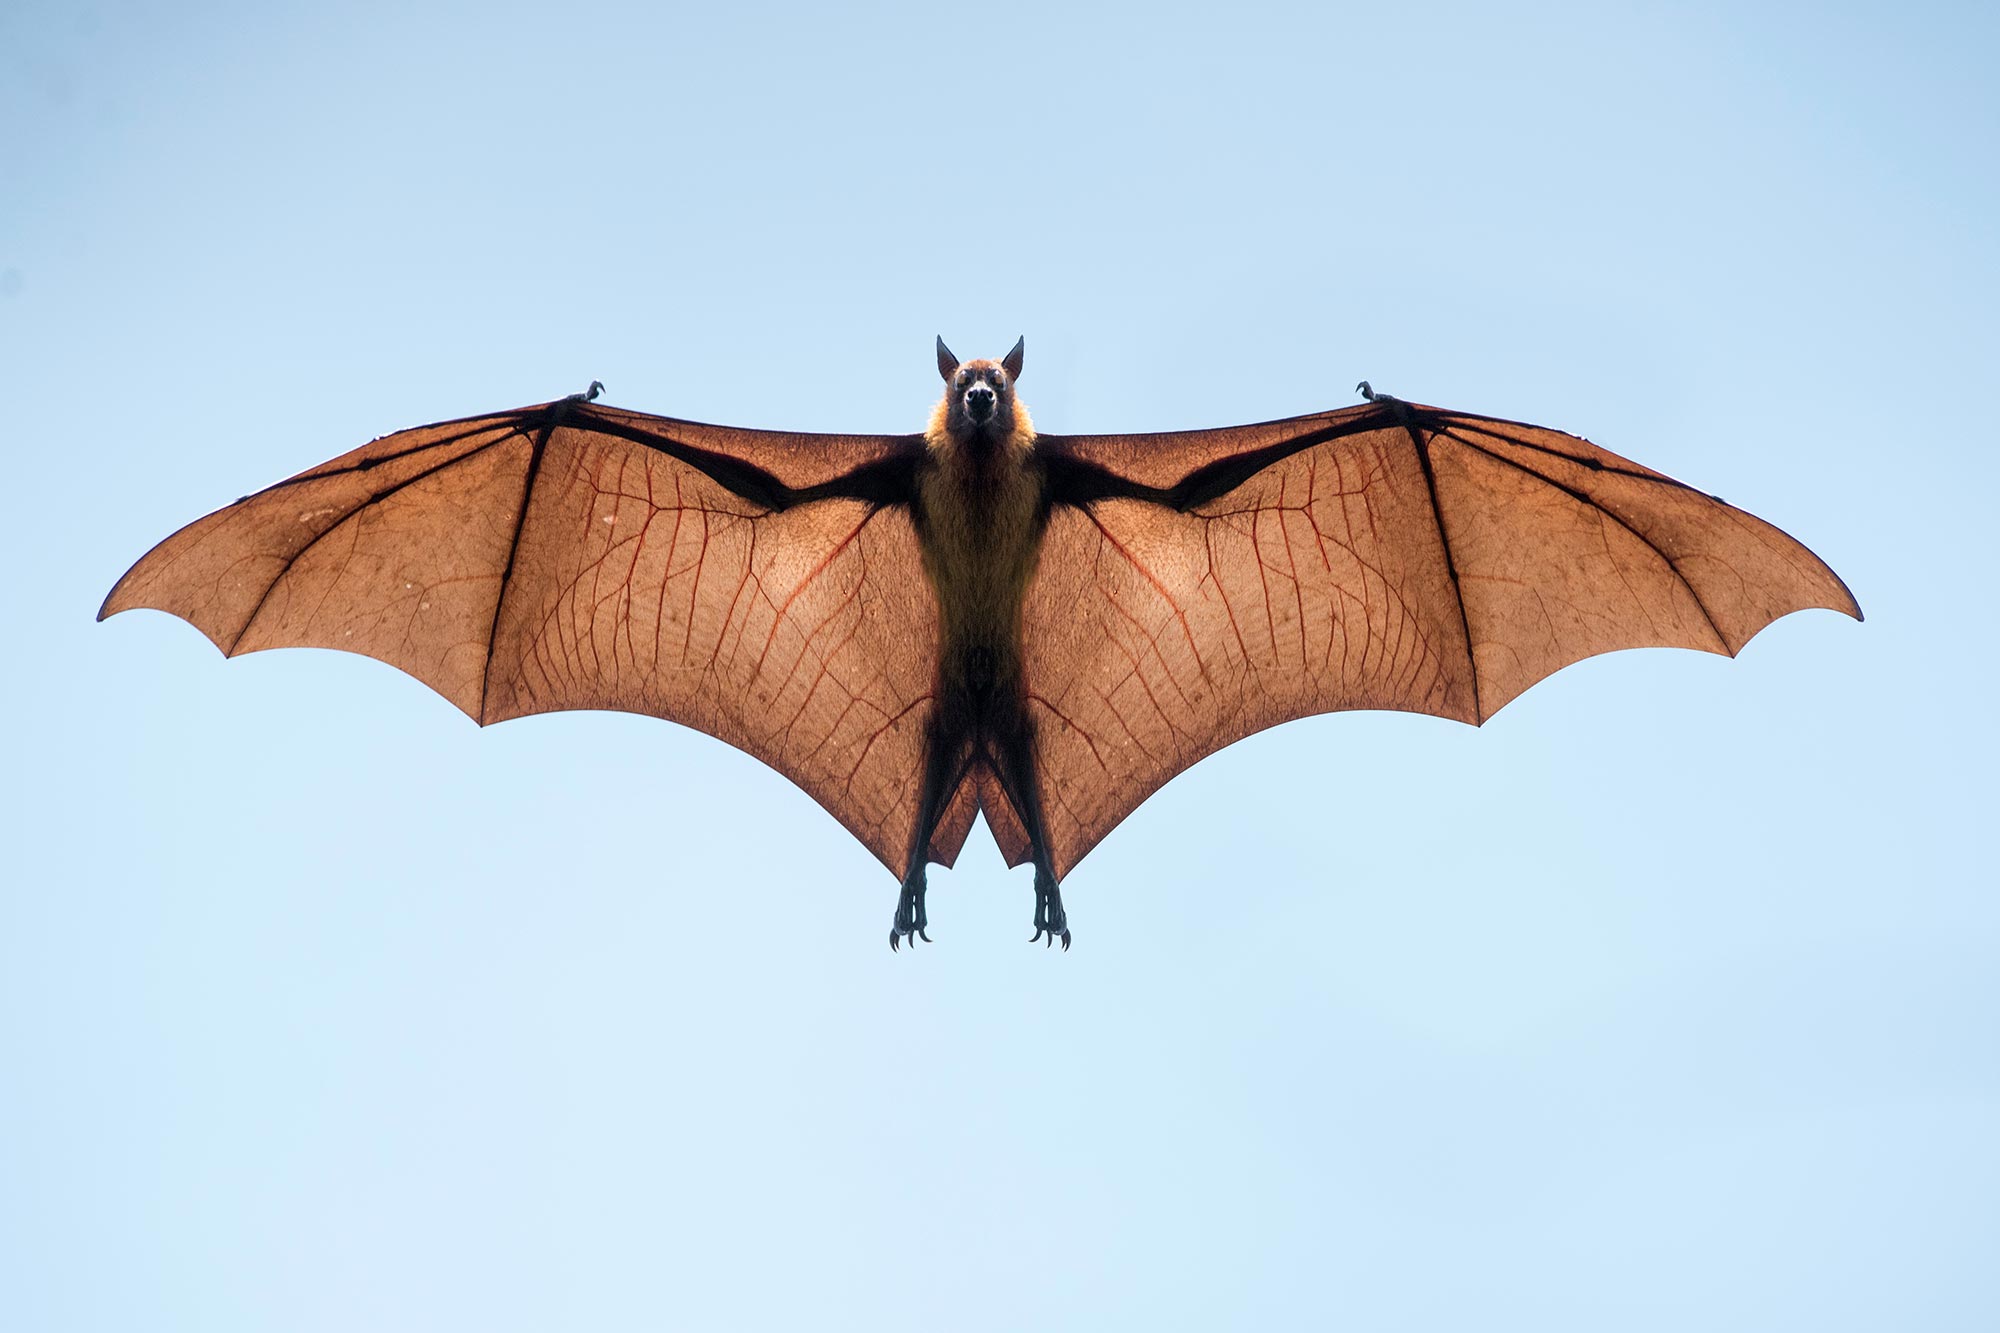 Bats offer clues to treating COVID-19 – secrets to longevity and disease tolerance